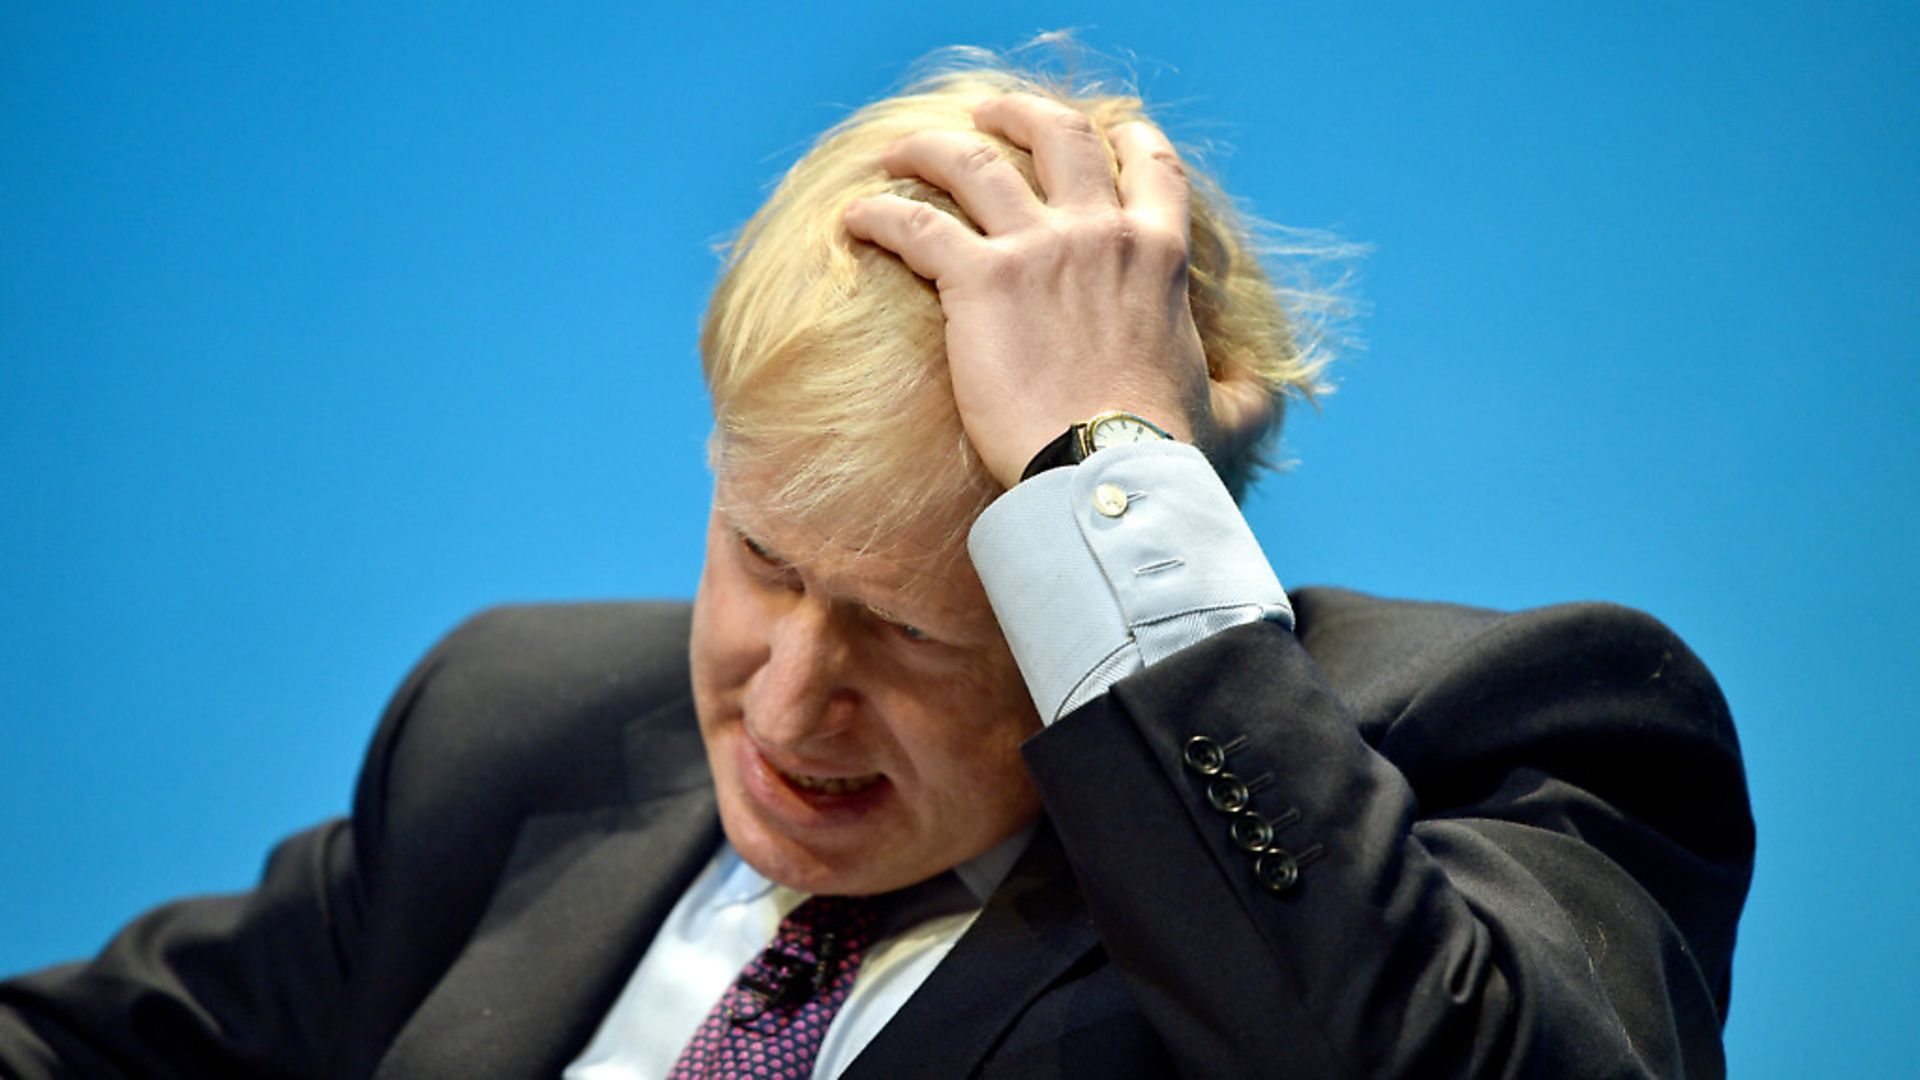 Prime minister Boris Johnson and senior ministers have come under intense criticism for their handling of the coronavirus outbreak. Photgraph: Ben Birchall/PA. - Credit: PA